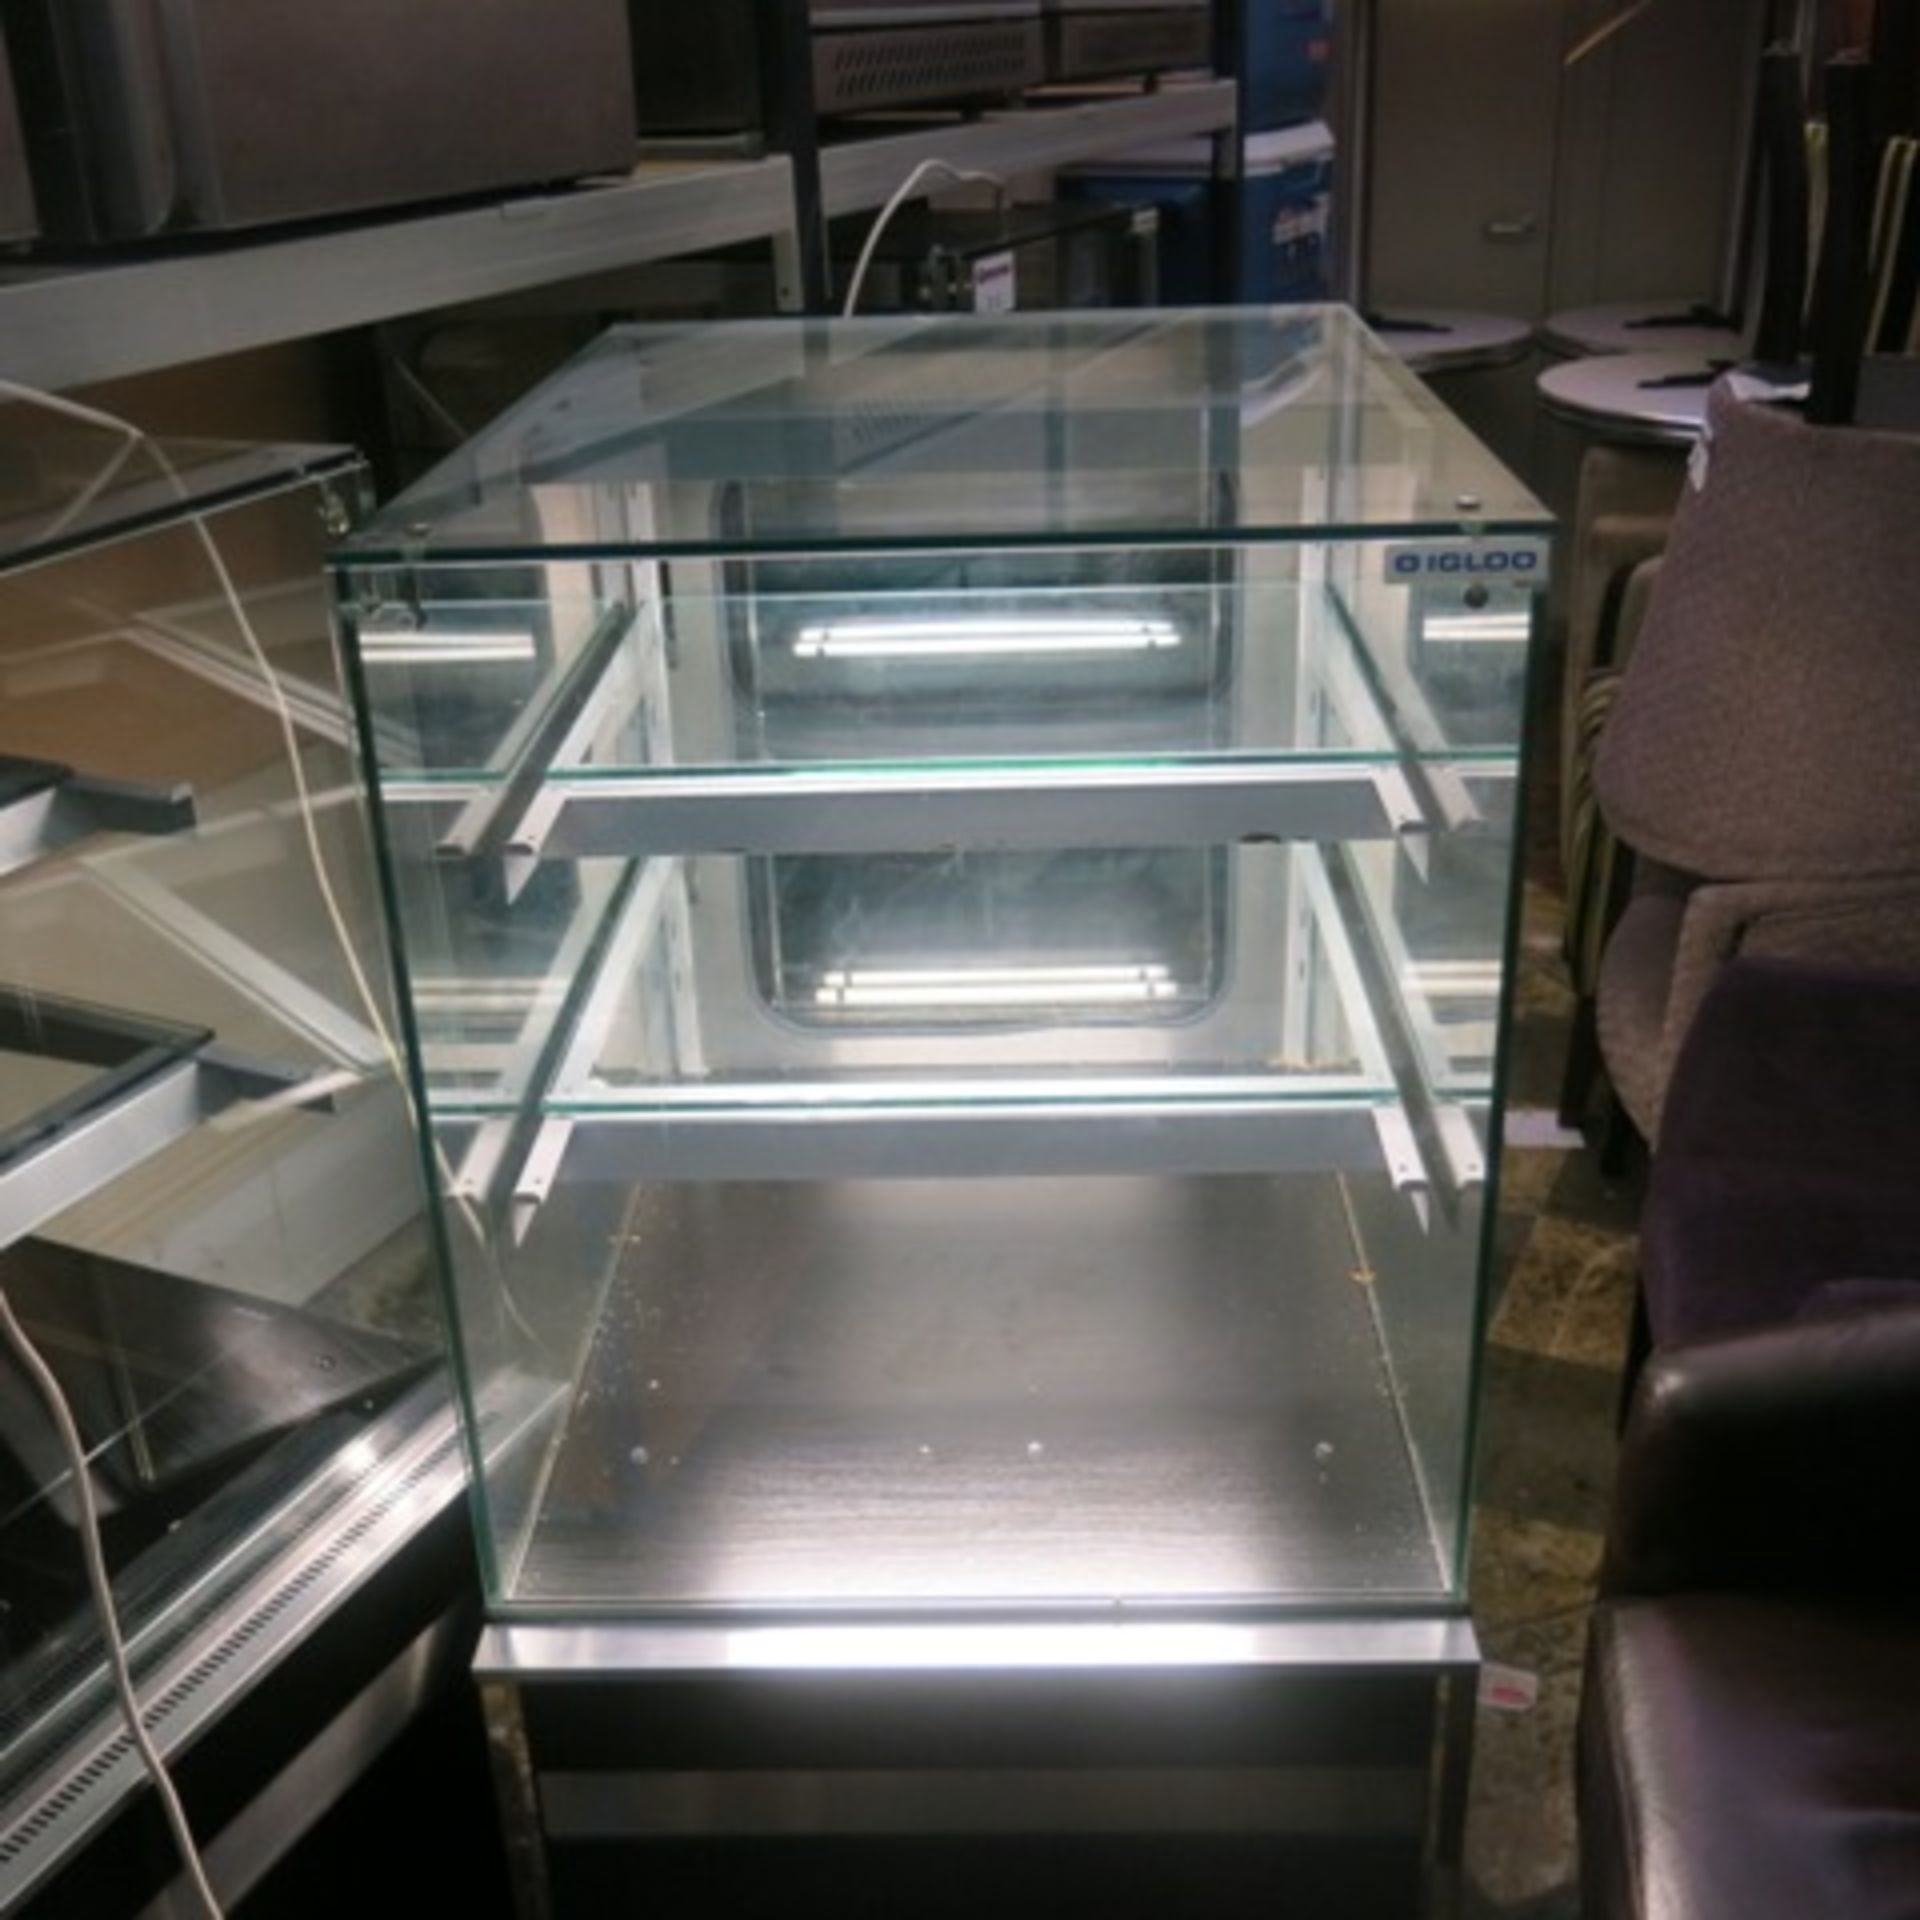 Igloo Refrigerated Glass Display Cabinet with 2 Glass Shelves, Model Gastroline Cube 0.6W. Size (H) - Image 4 of 10